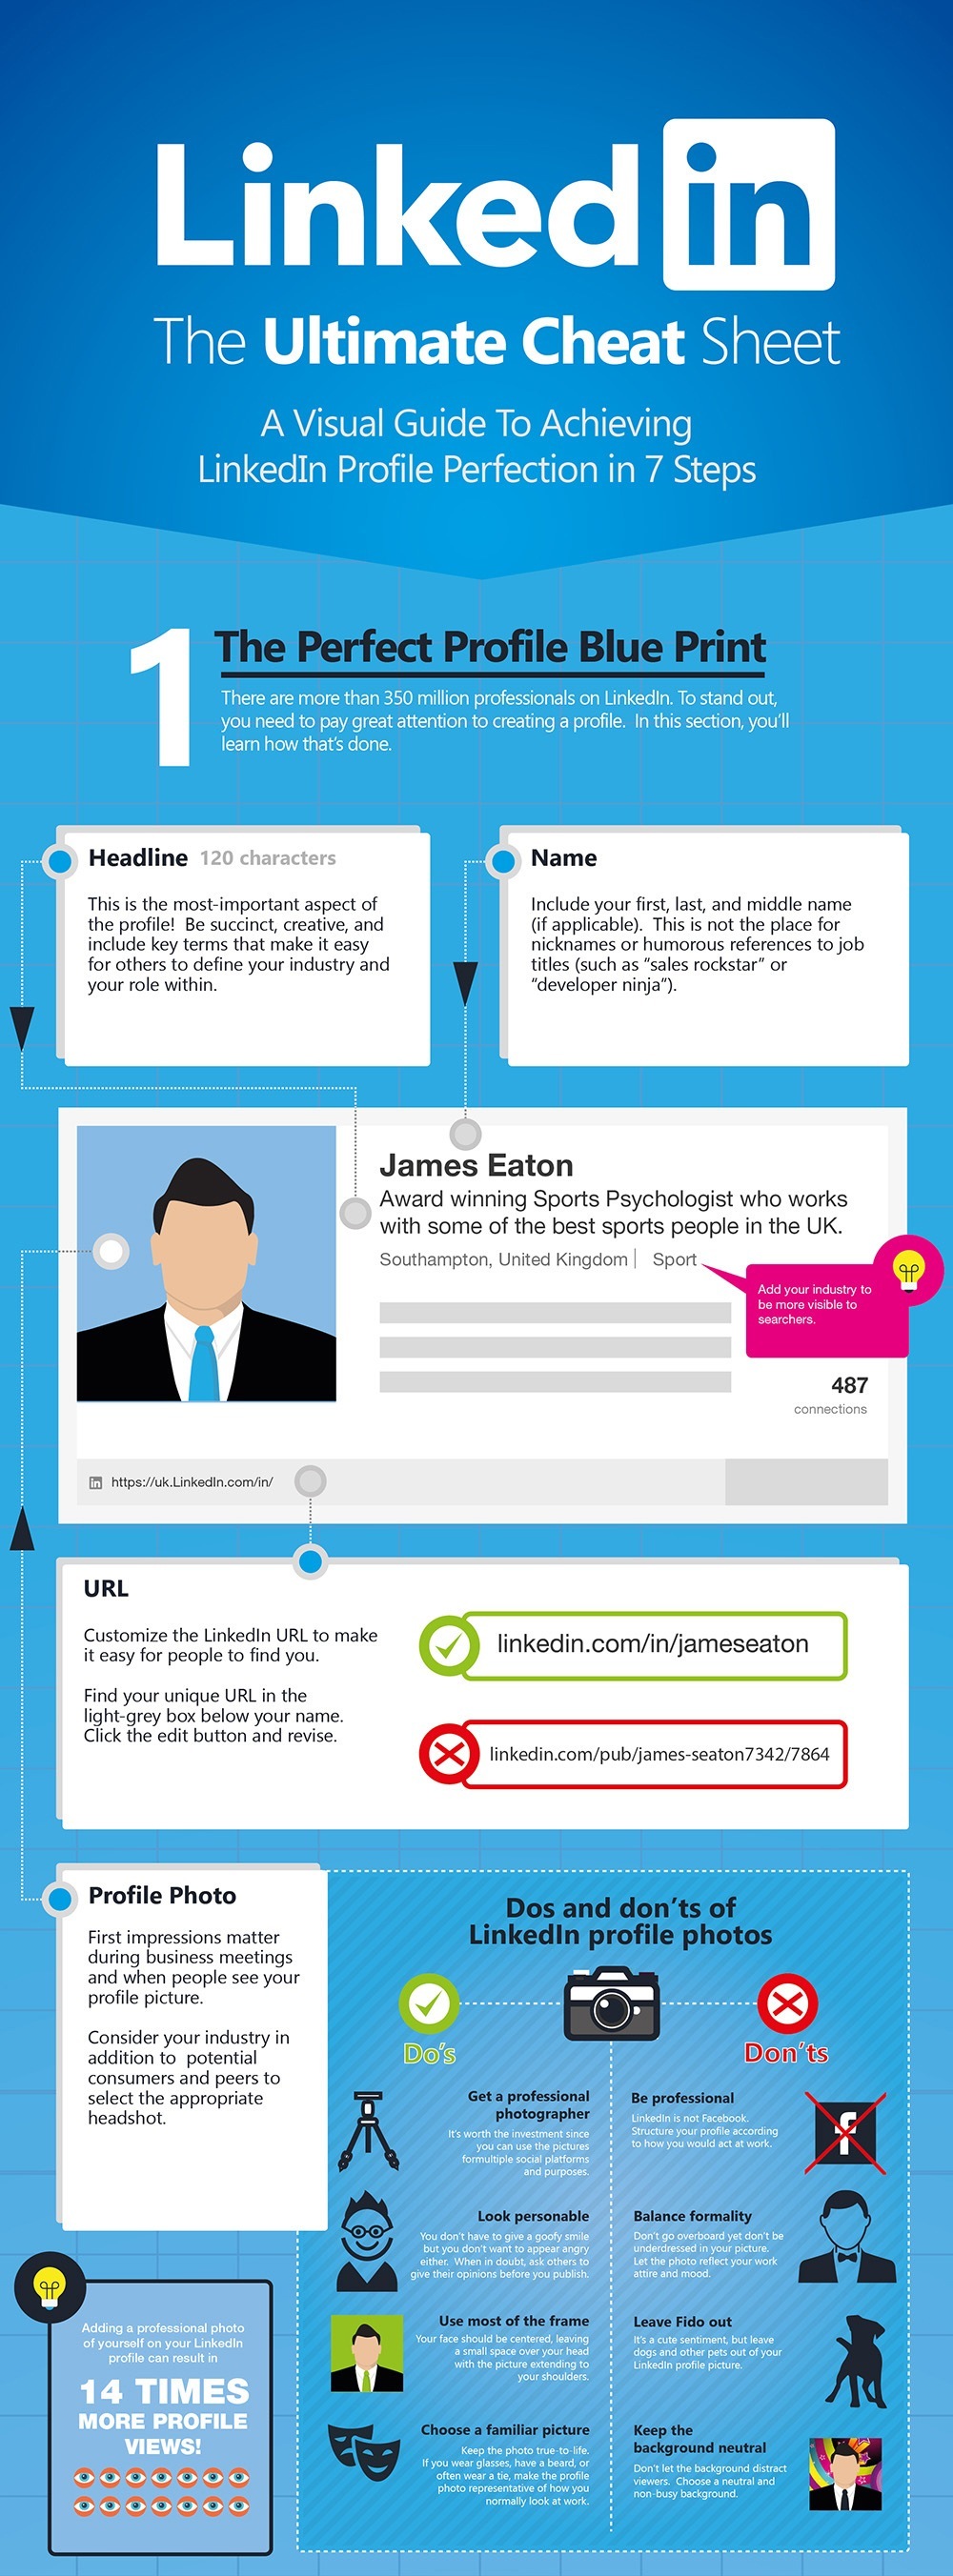 LinkedIn tips How to craft the perfect profile infographic 